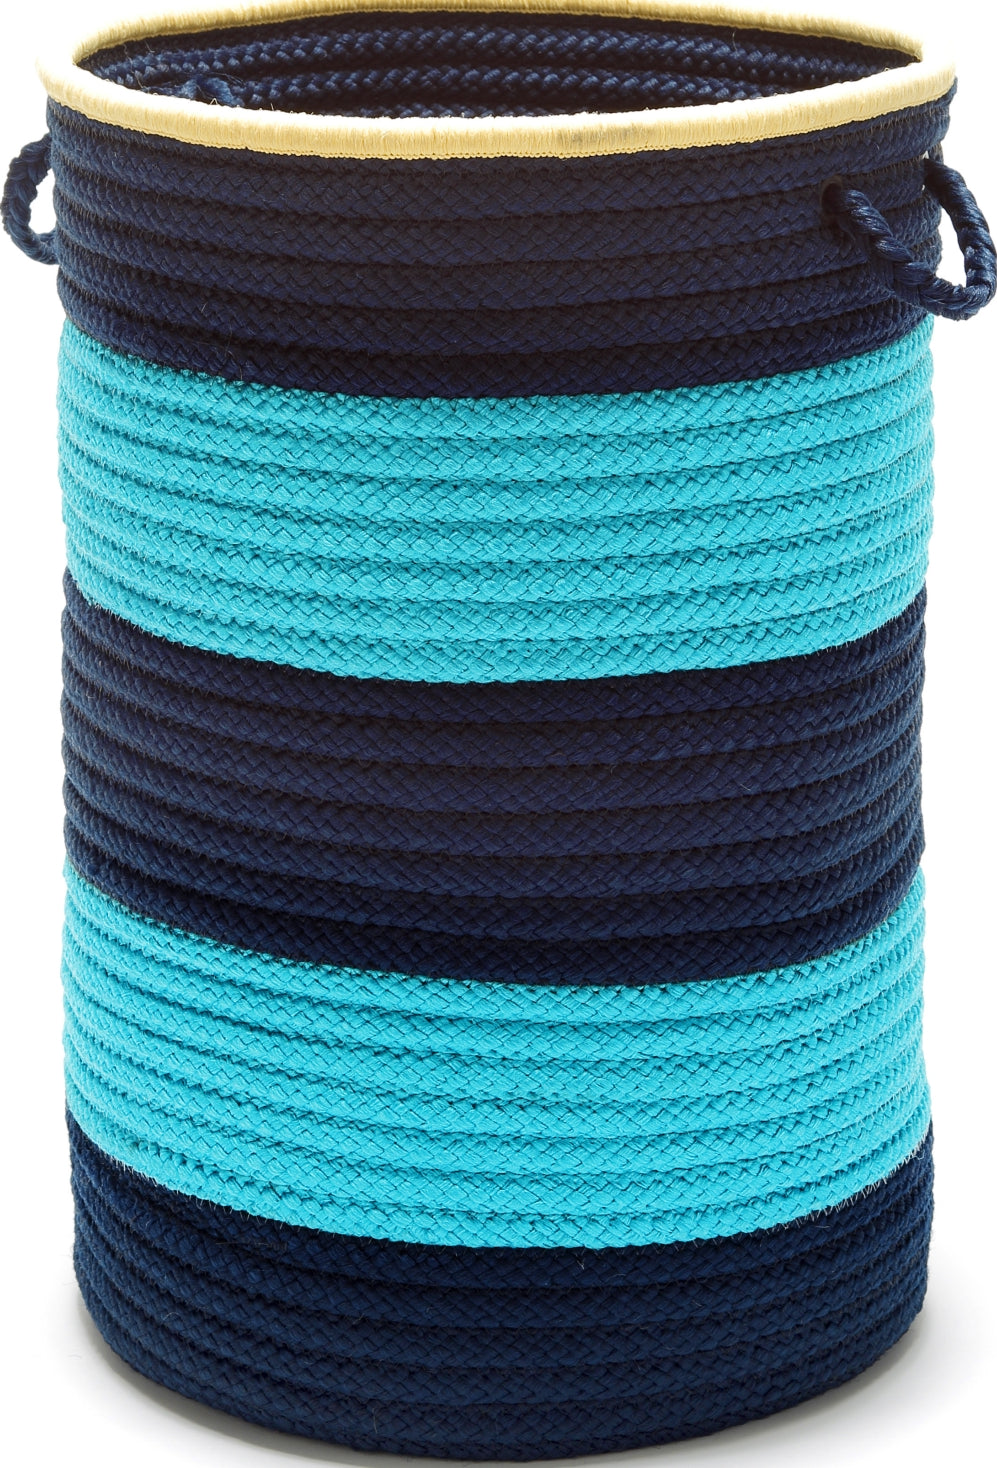 Colonial Mills Color Block Hamper LO51 Turquoise Navy